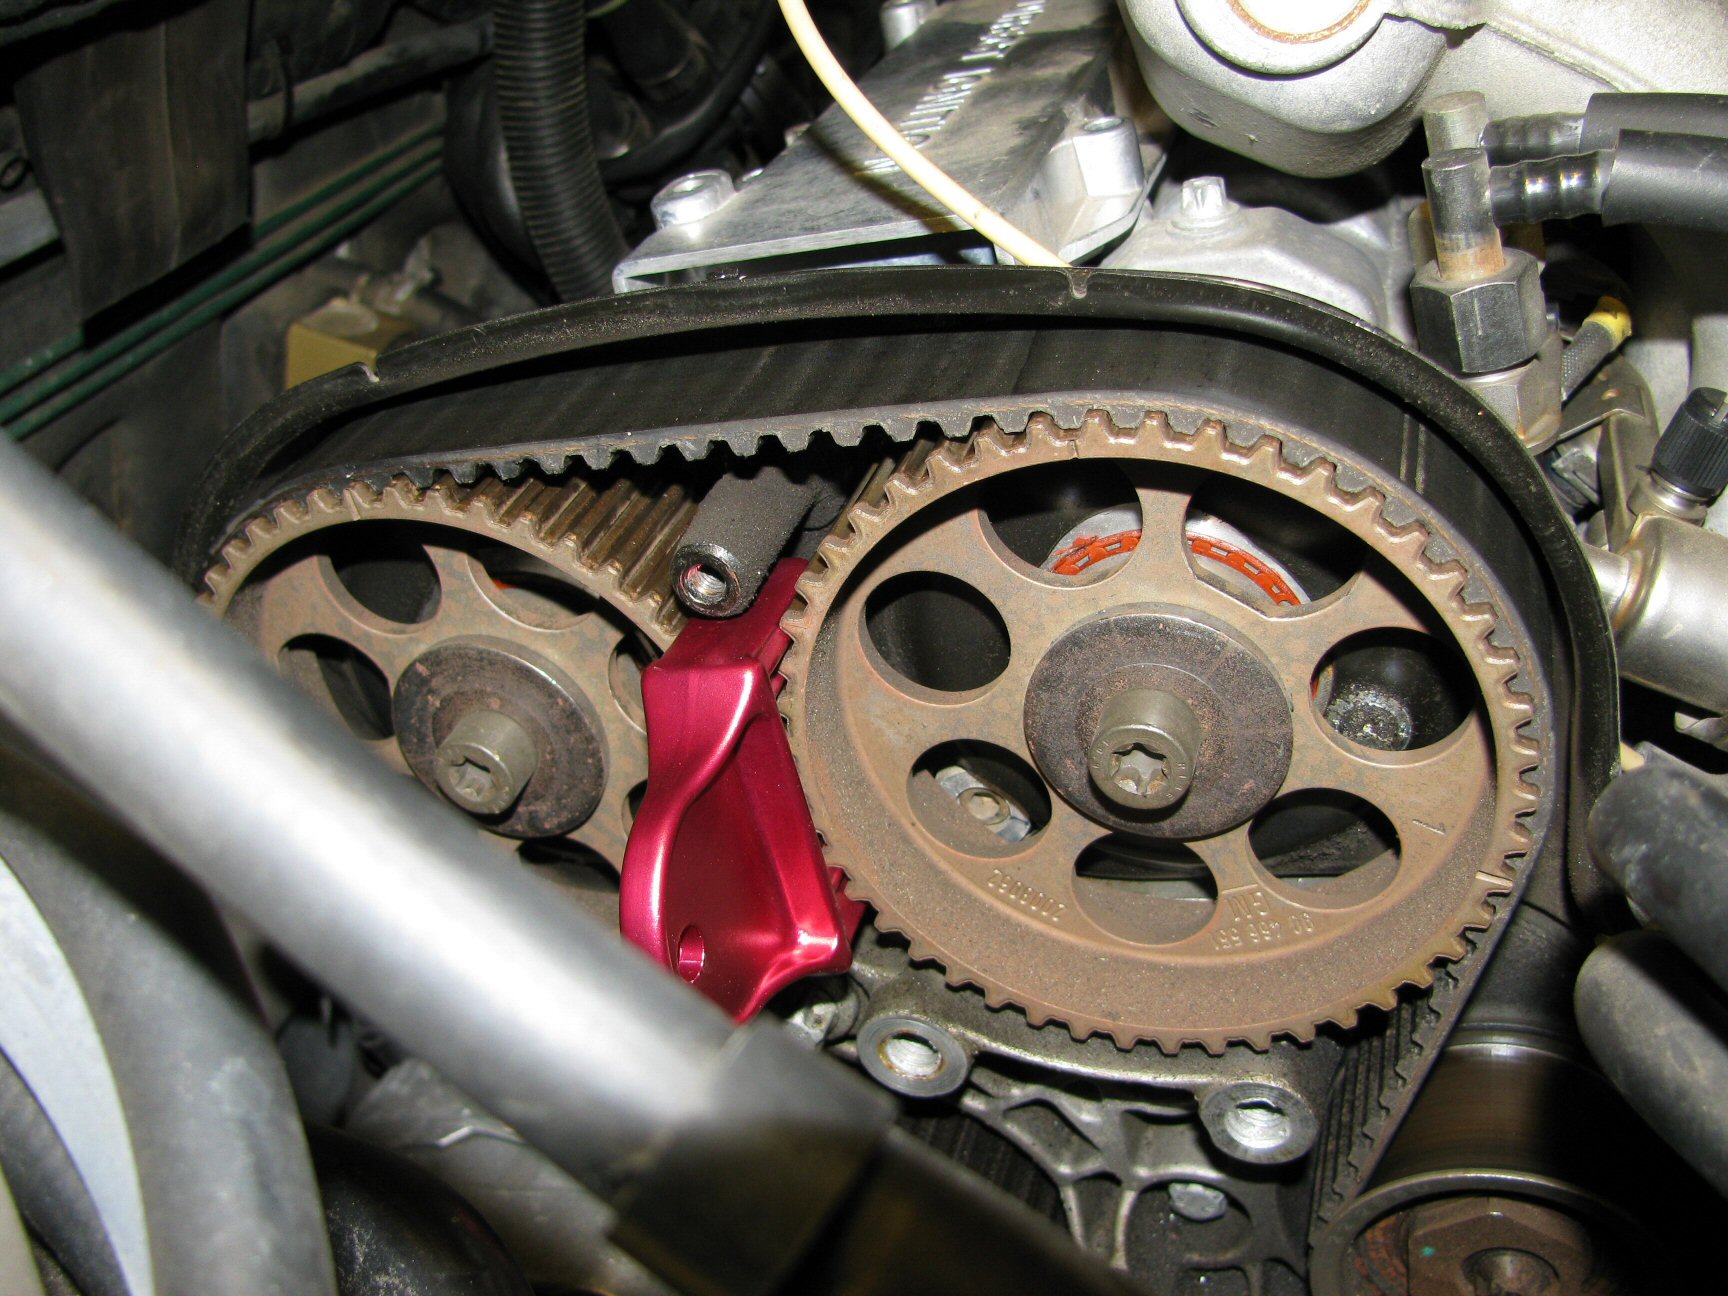 Camshaft pulleys 1 (left) and 2 (right).